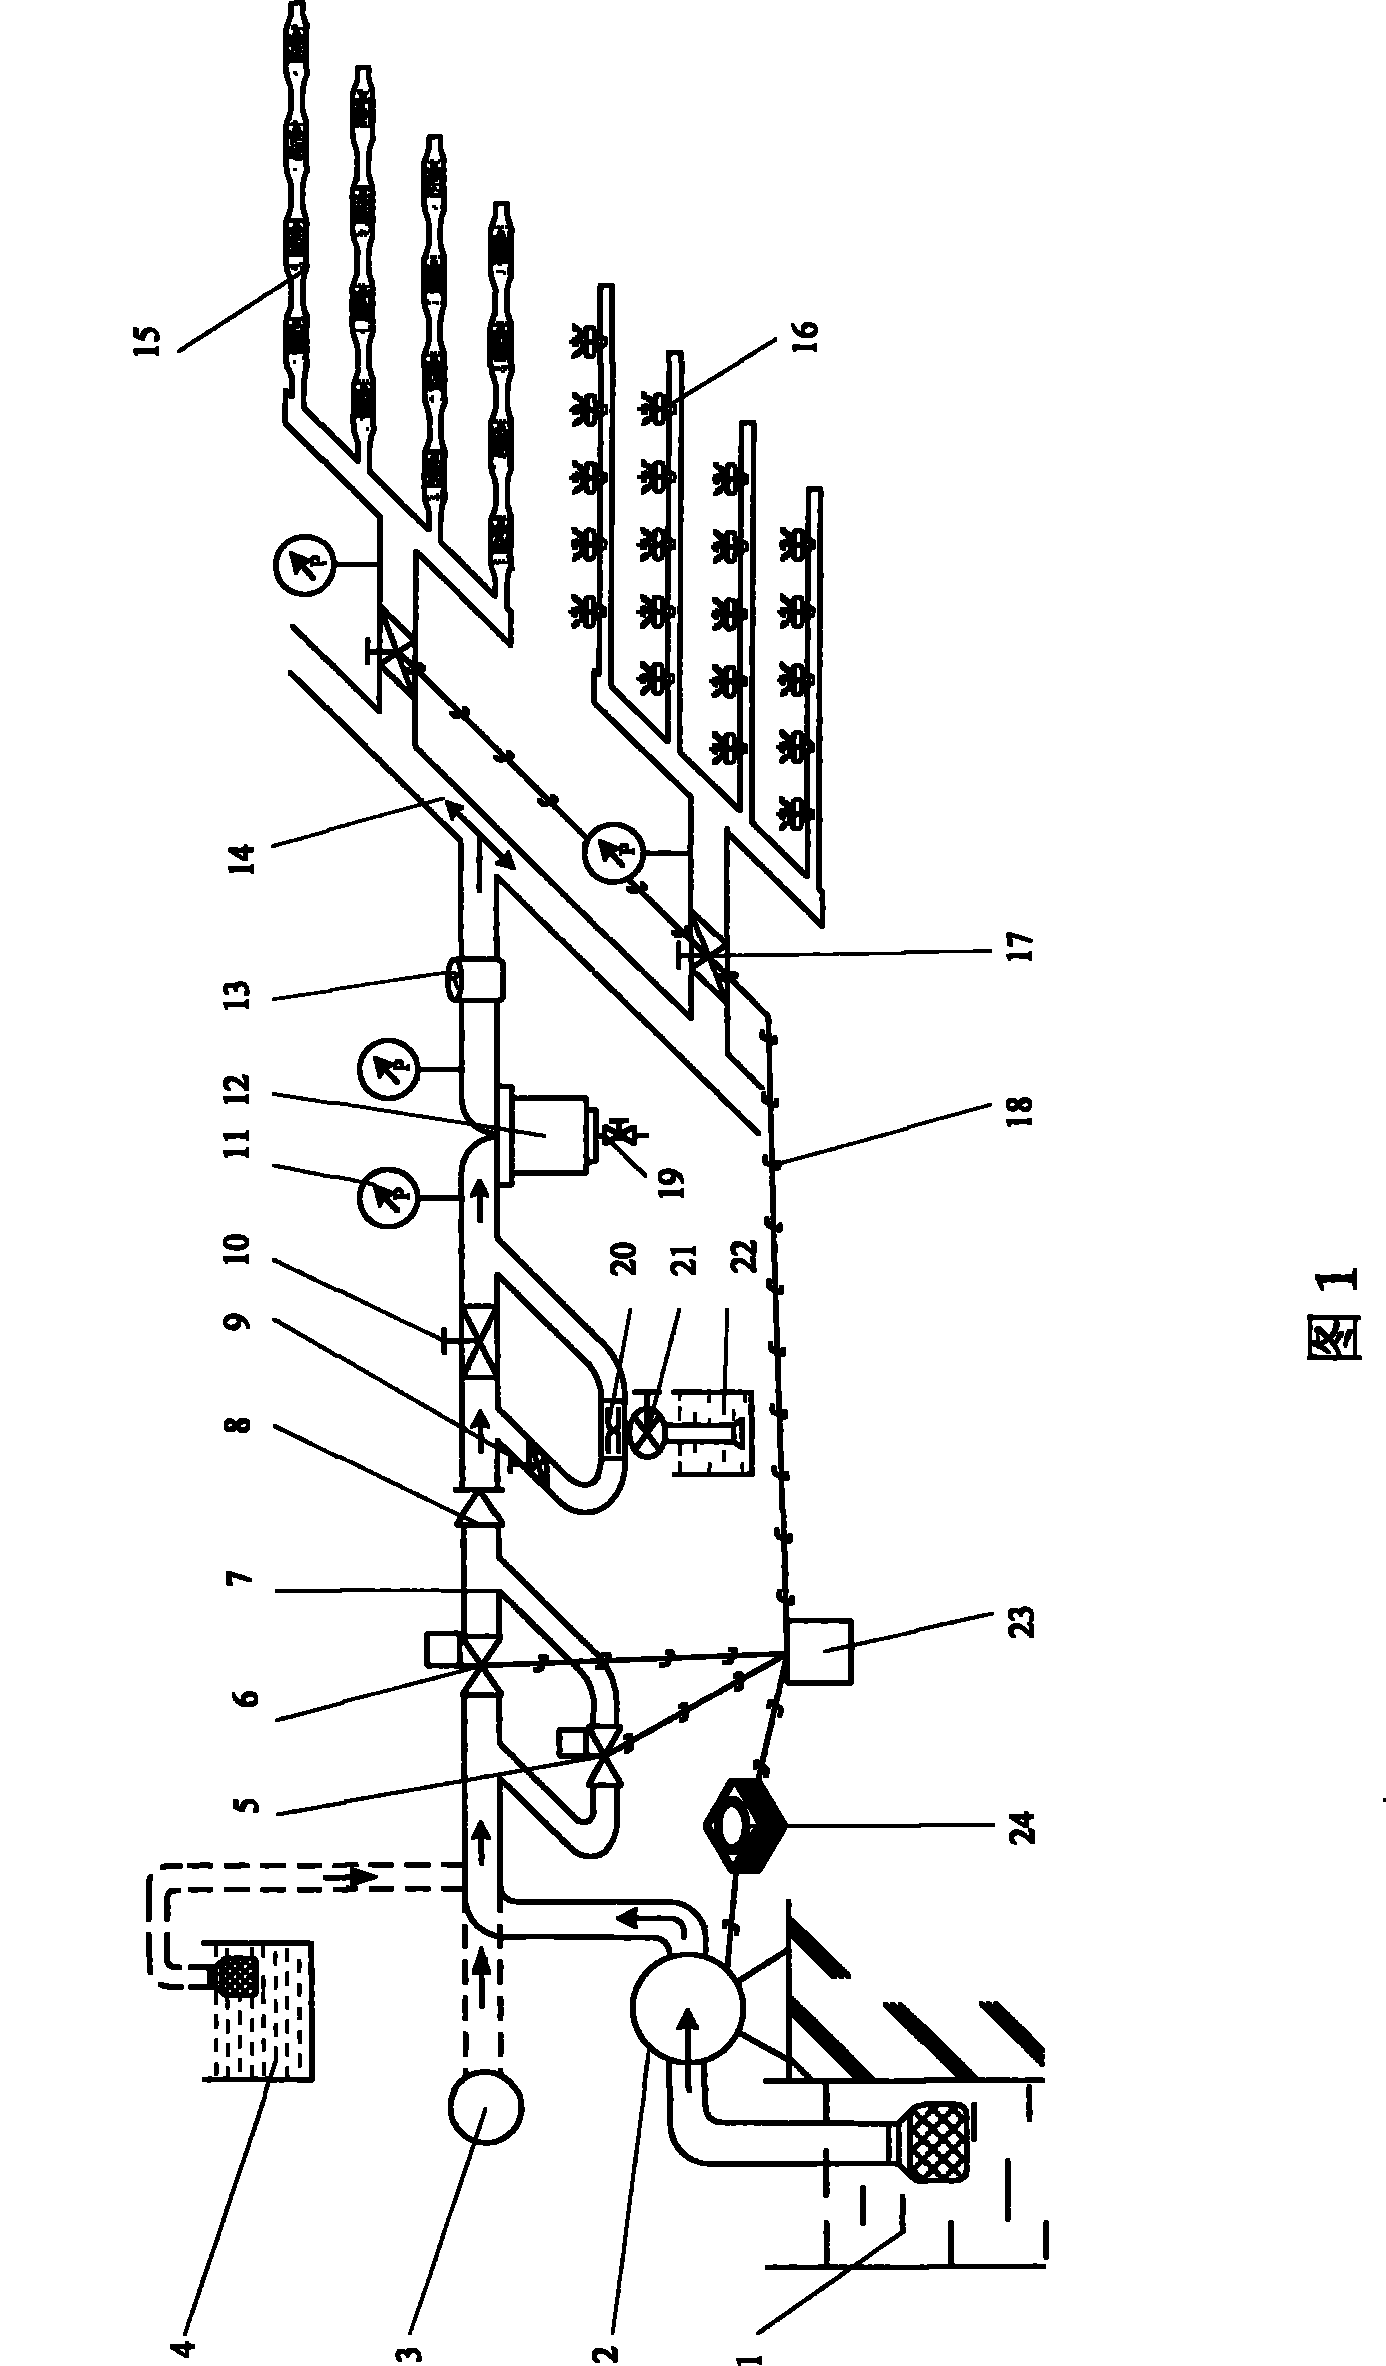 Control method of dynamic water-pressure drip-irrigation system